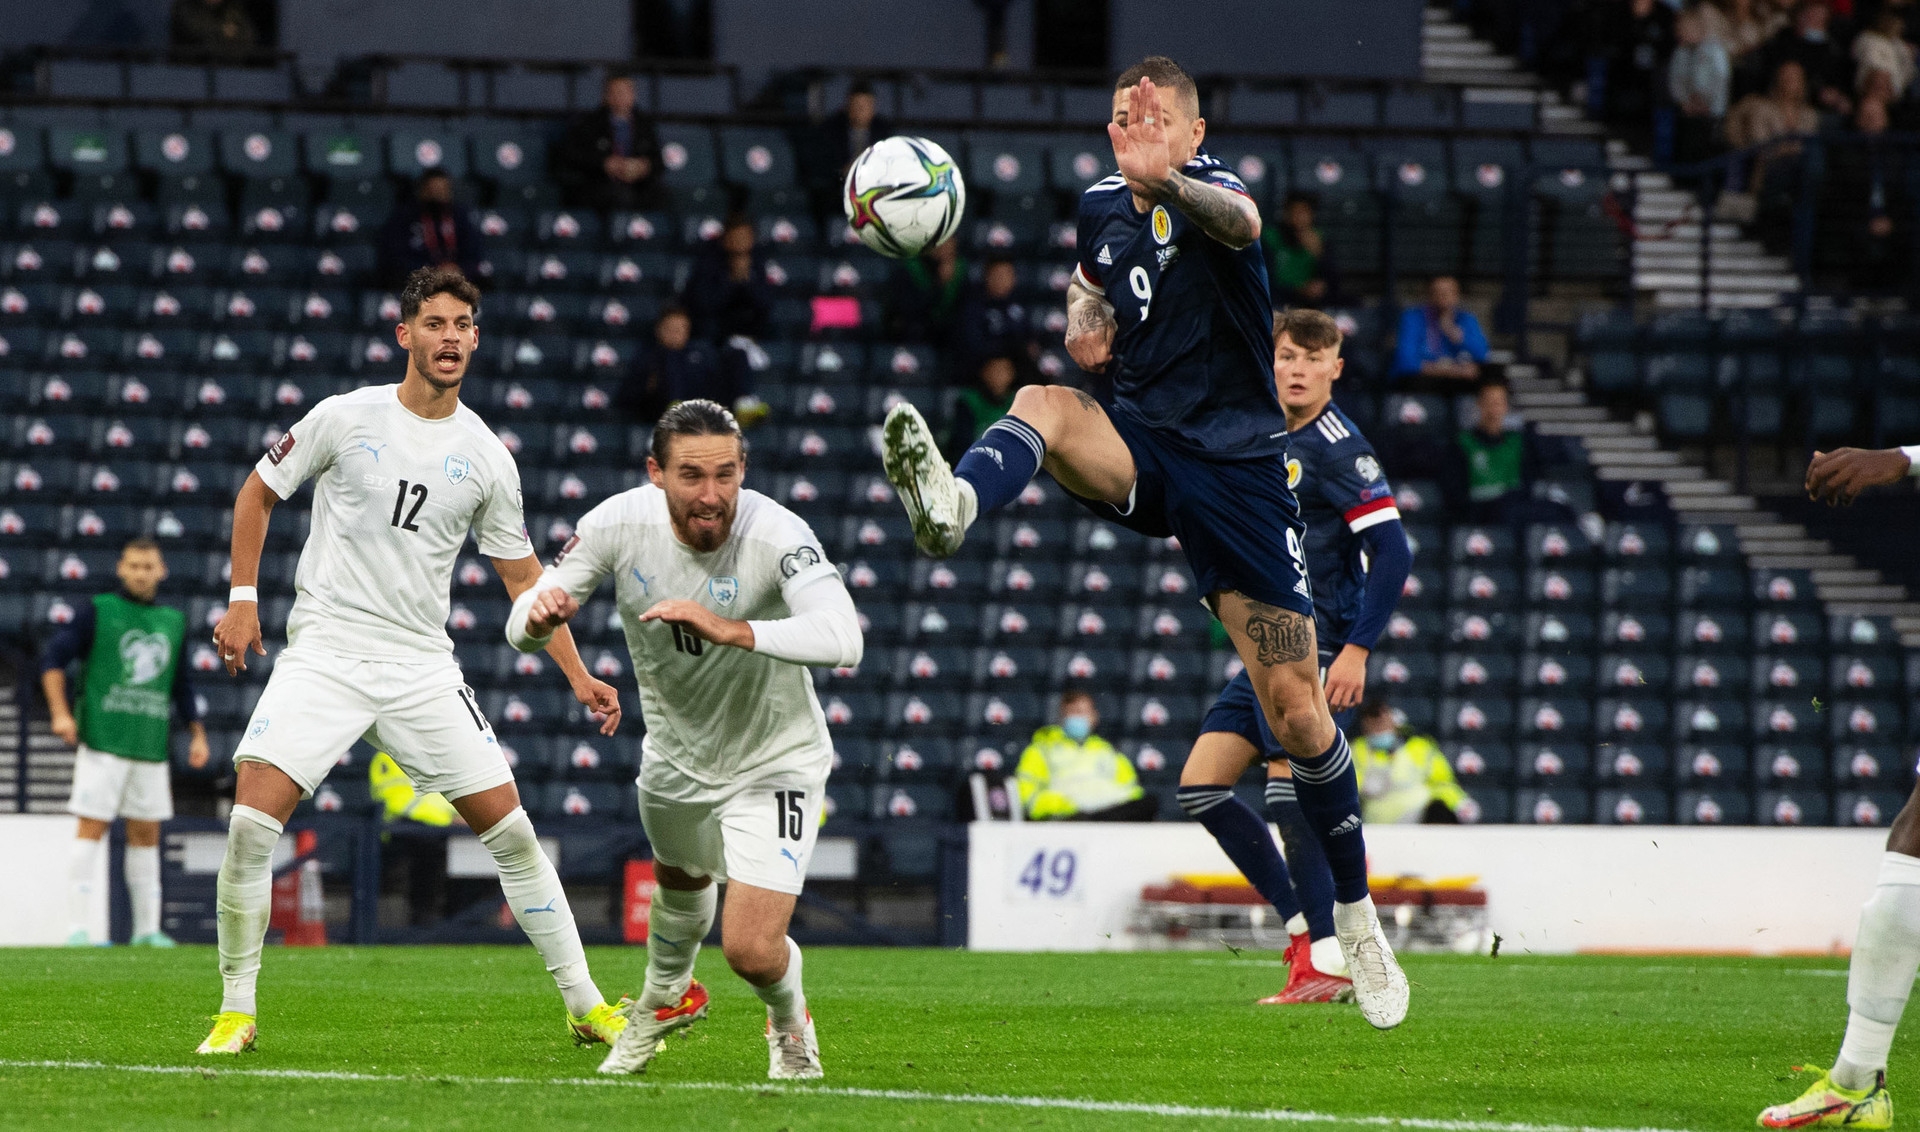 <strong>Lyndon Dykes had missed a penalty and feared it wasn’t going to be his night when the referee chopped off this apparent leveller. Fortunately for Scotland, VAR intervened and allowed the goal to stand.</strong>” /><span class=